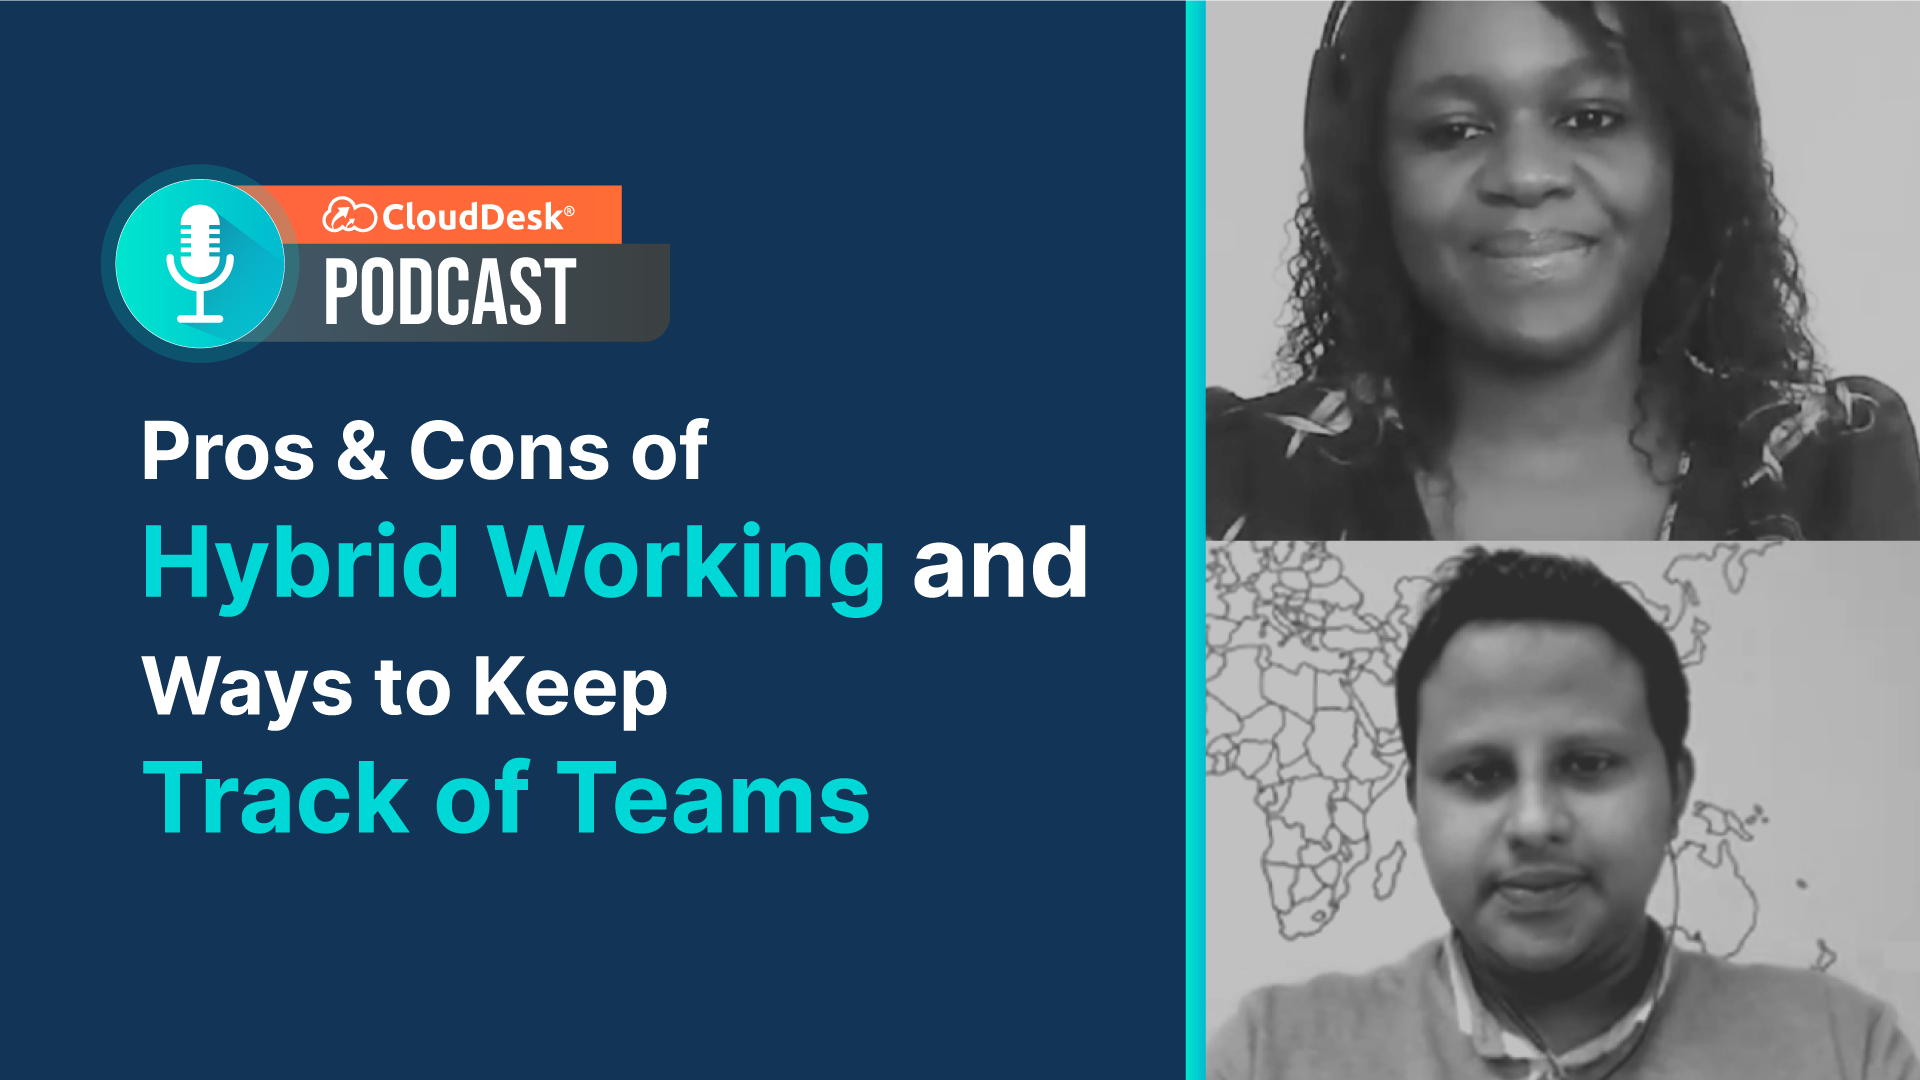 Pros-&-Cons-of-Hybrid-working-and-ways-to-keep-track-of-teams